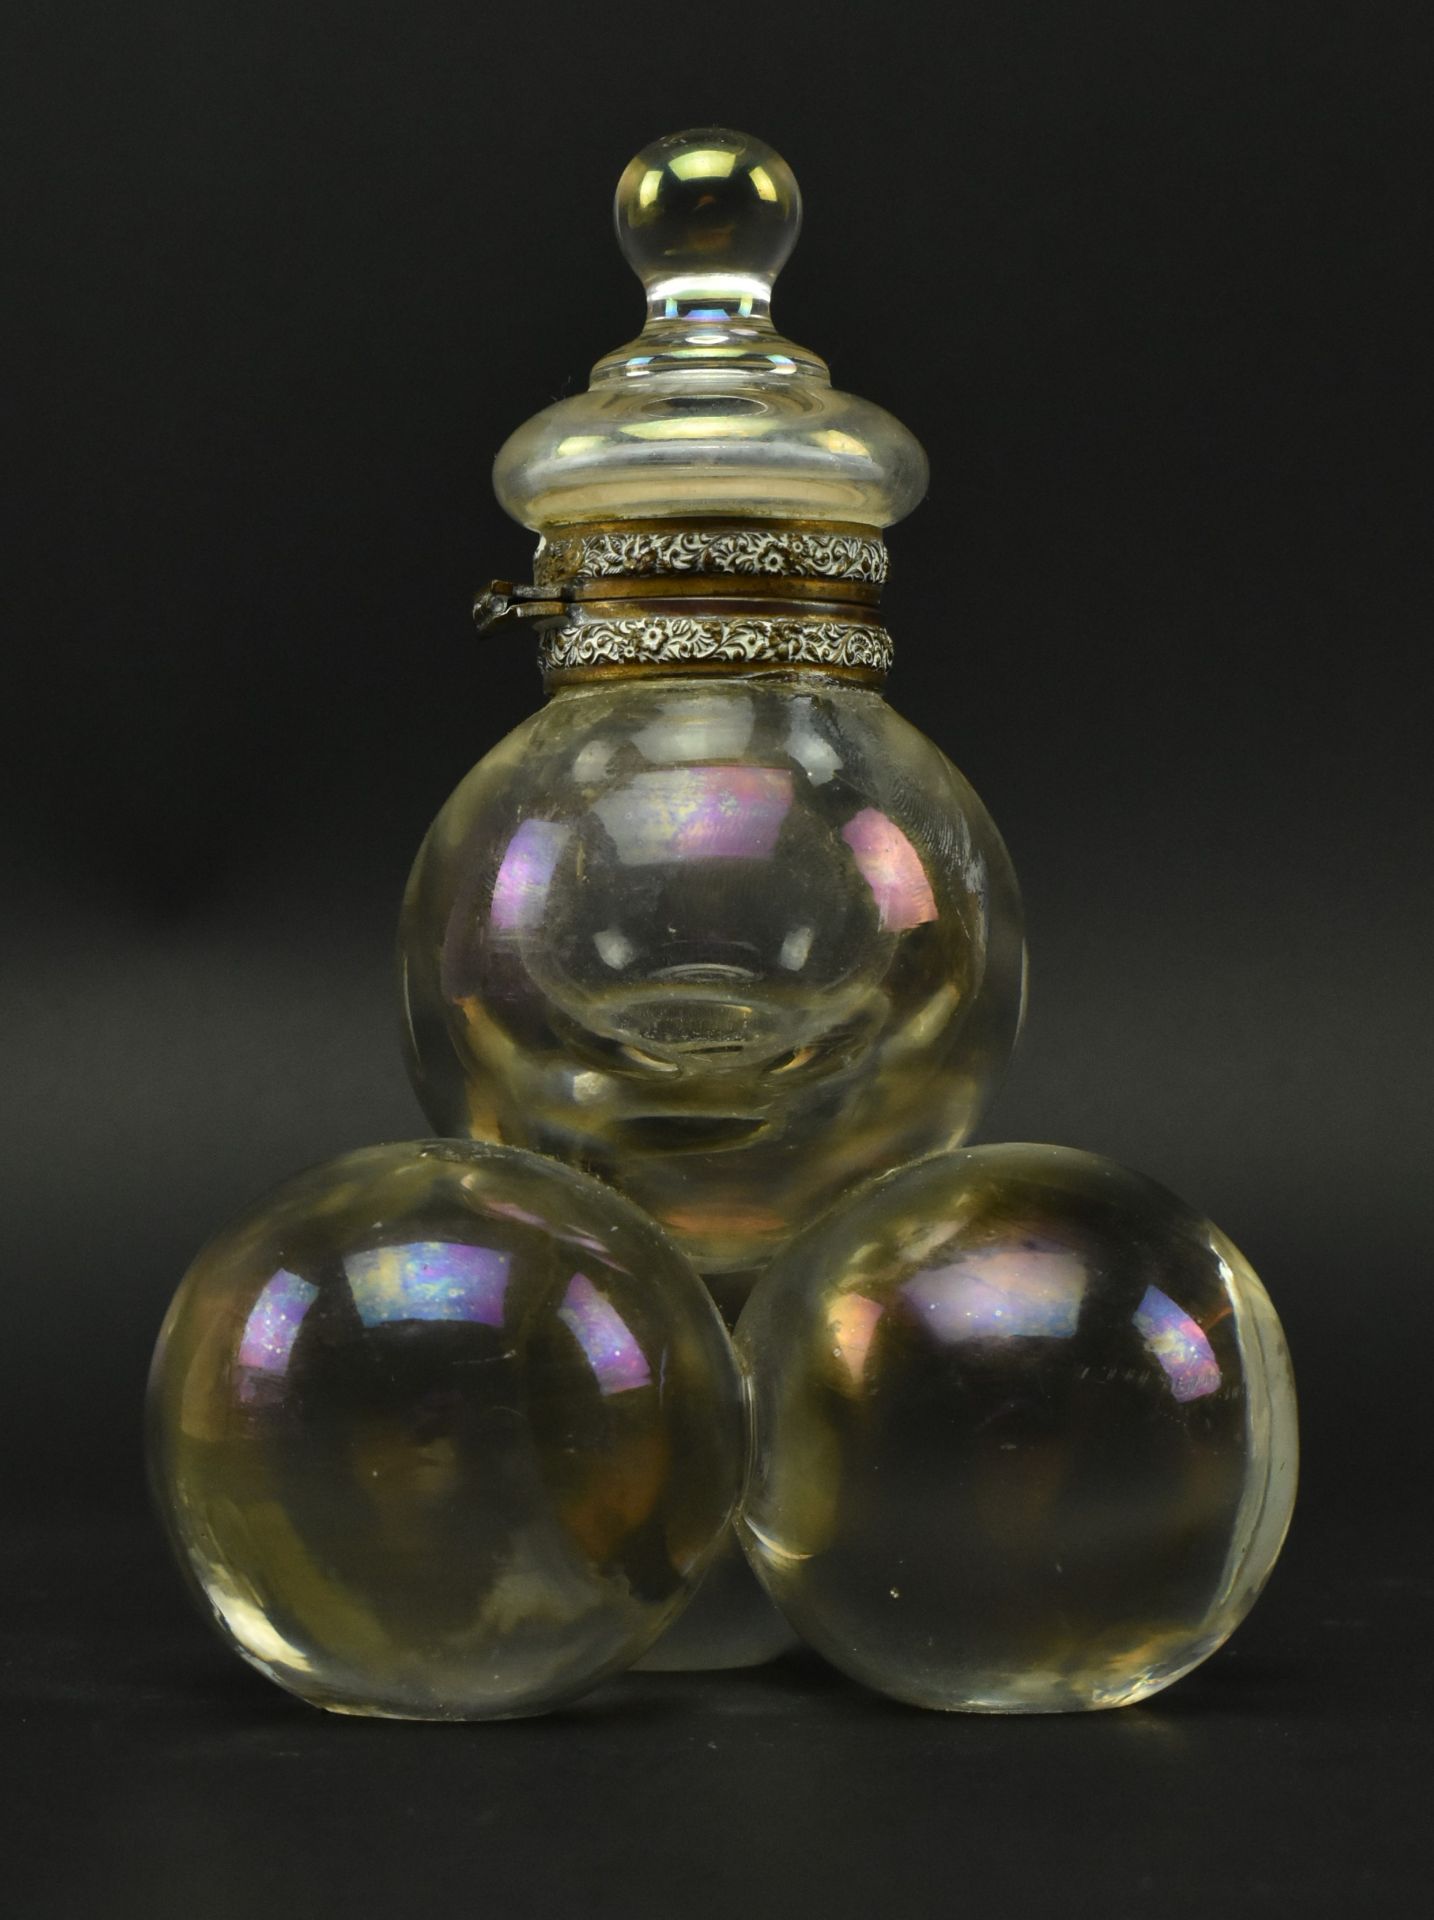 HARRACH LATE 19TH CENTURY IRIDESCENT GLASS BUBBLES INKWELL